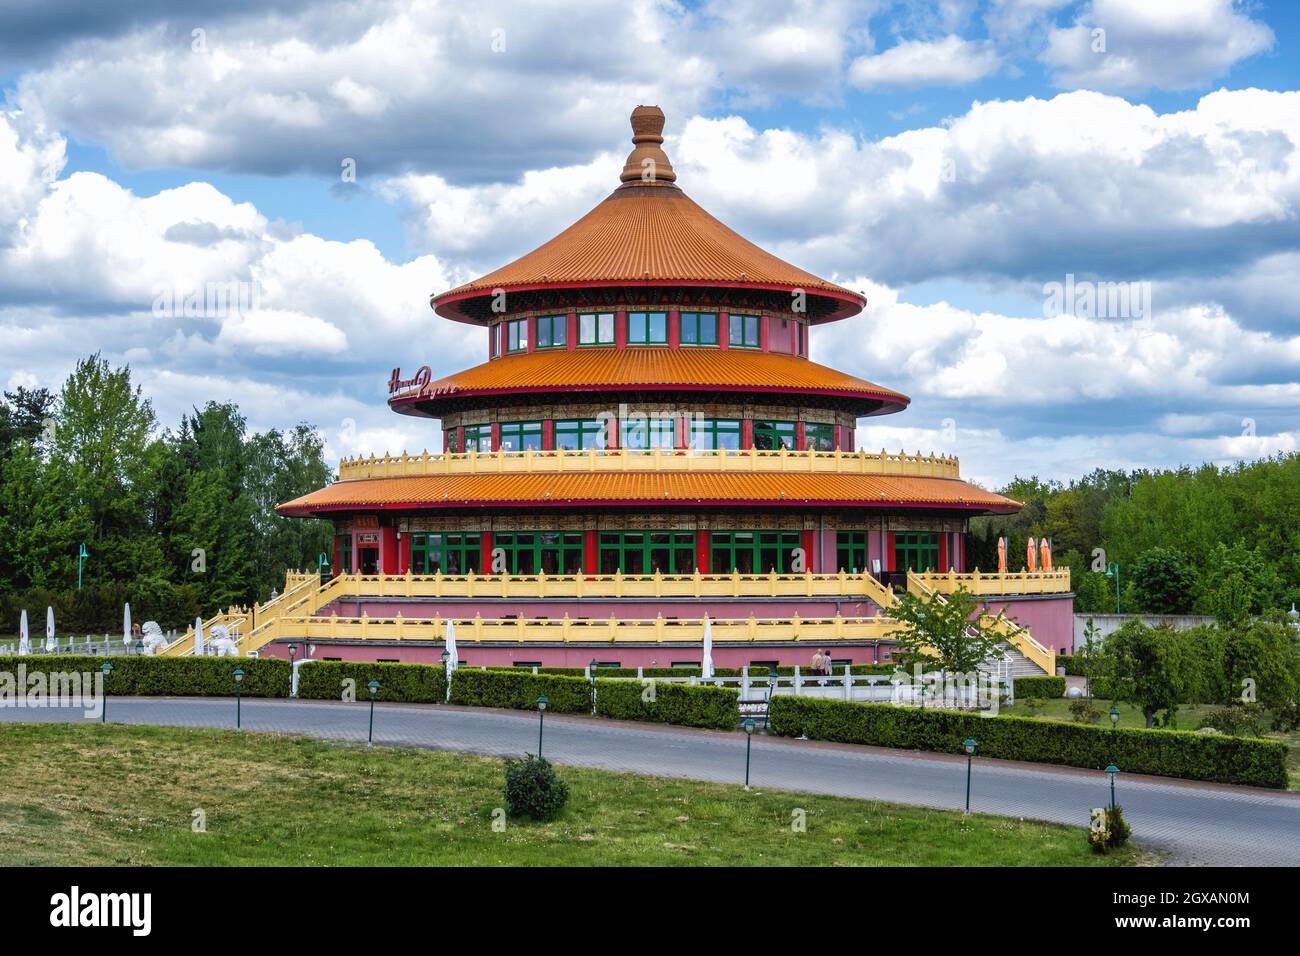 Himmels Pagode  Chinese Restaurant exterior in Hohen Neuendorf, Berlin. Colourful multi-storey building Stock Photo